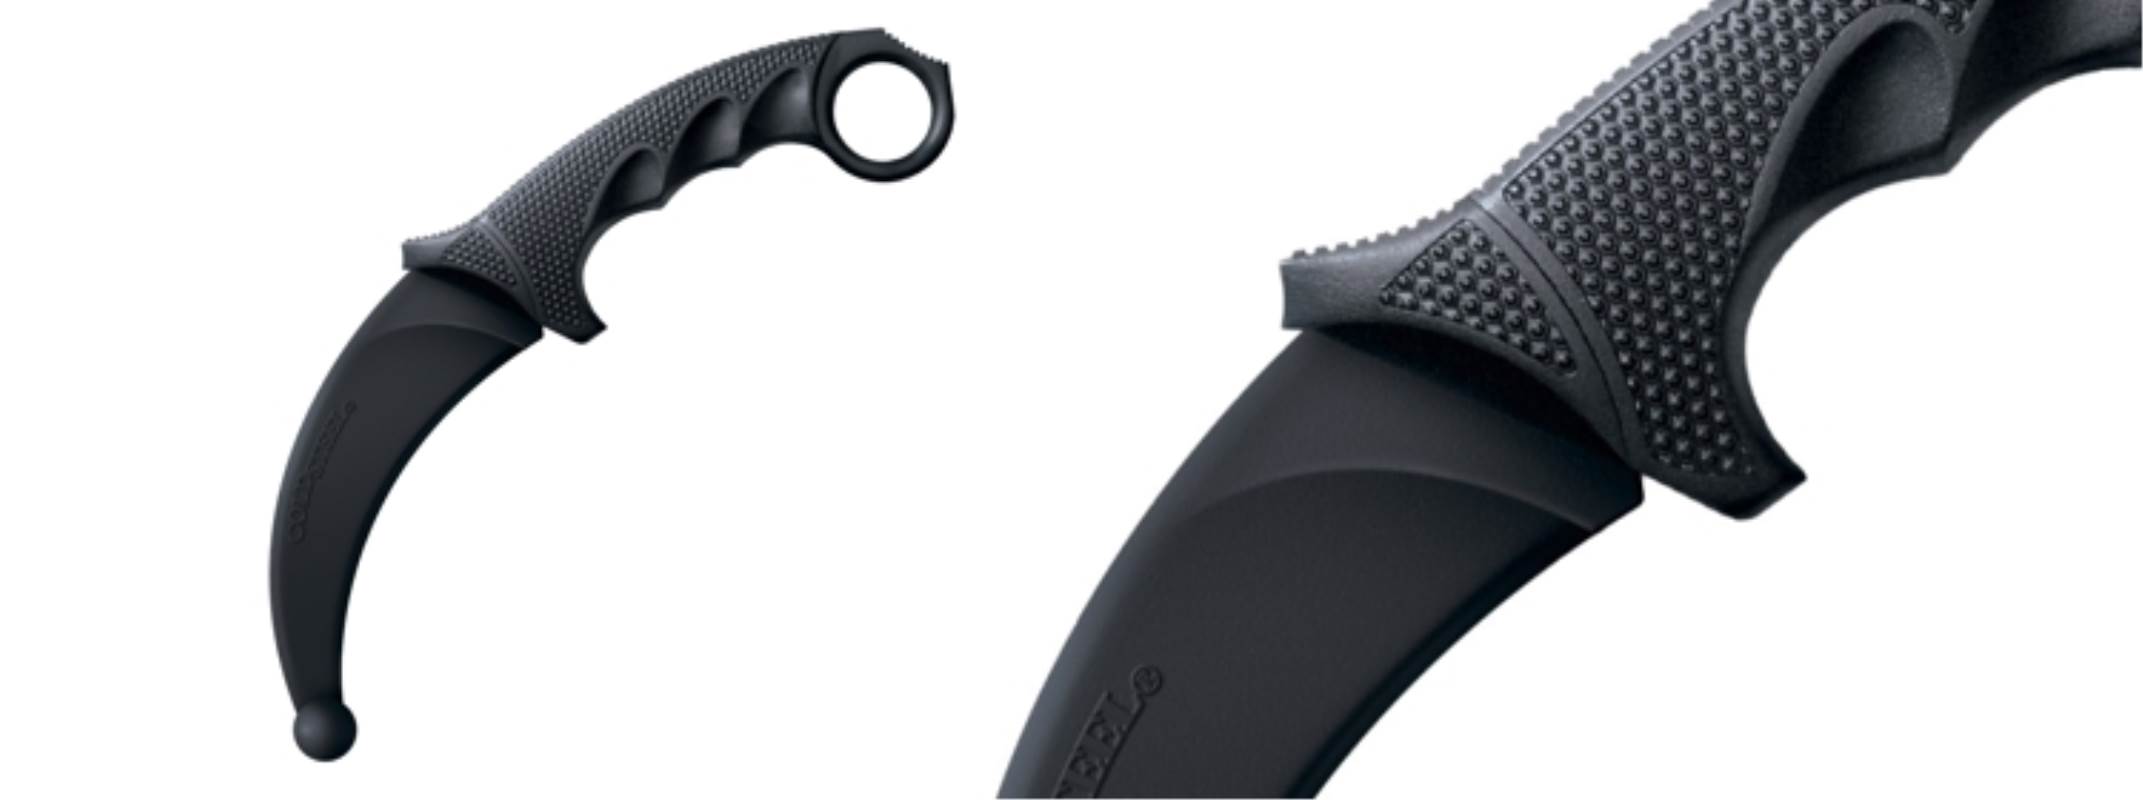 Karambit Trainer - Knife Accessories at